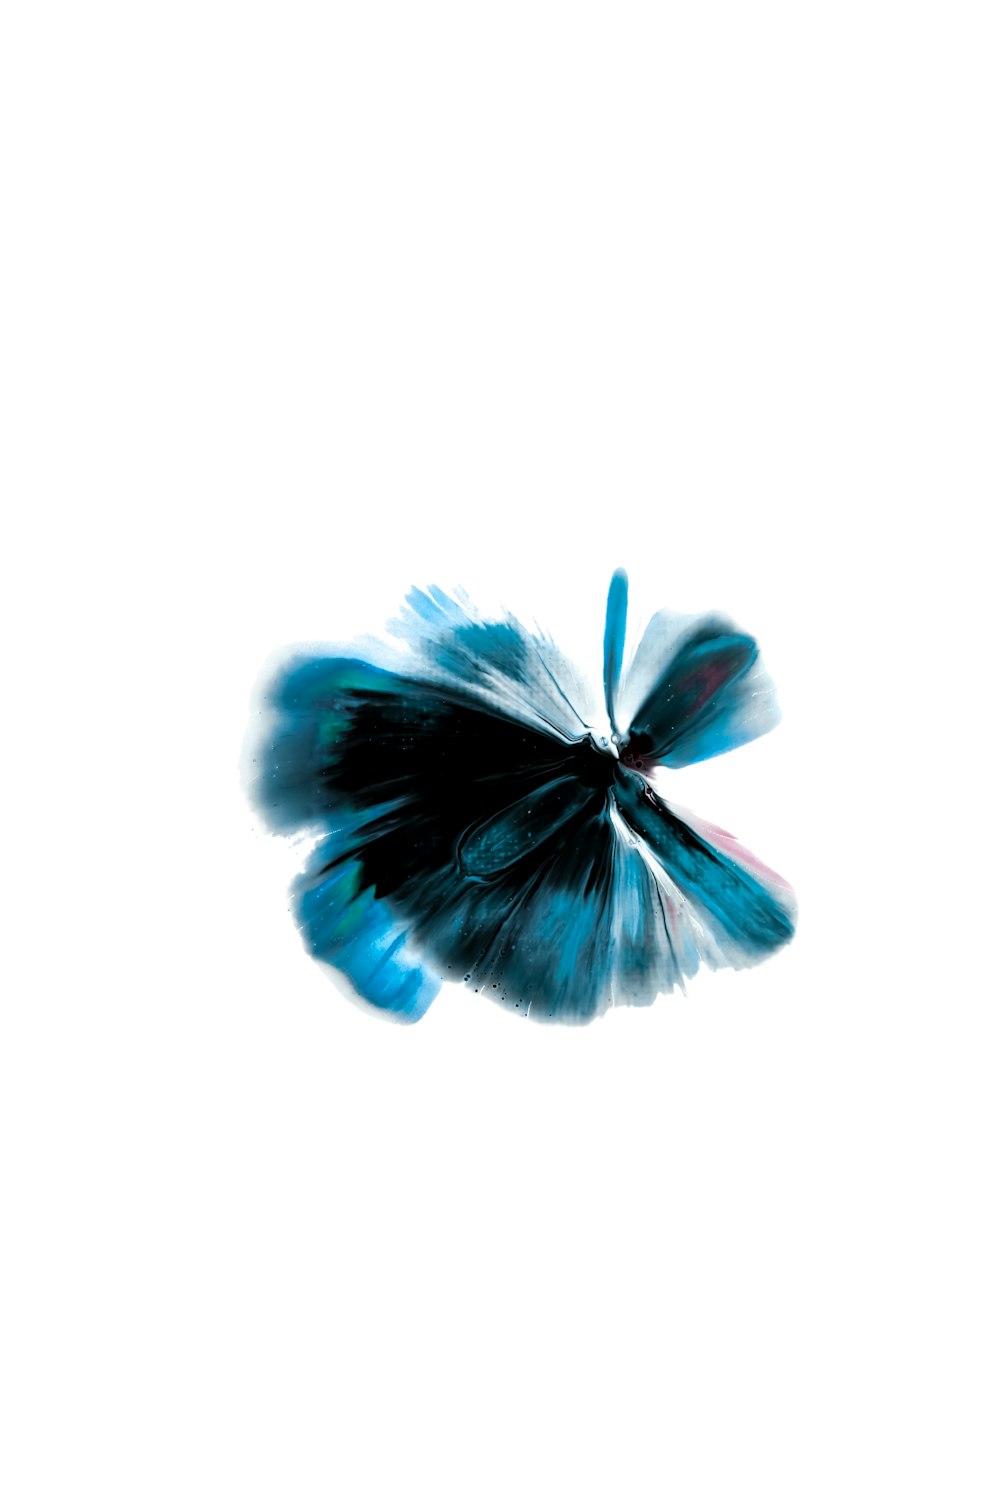 a blue and black butterfly flying in the sky